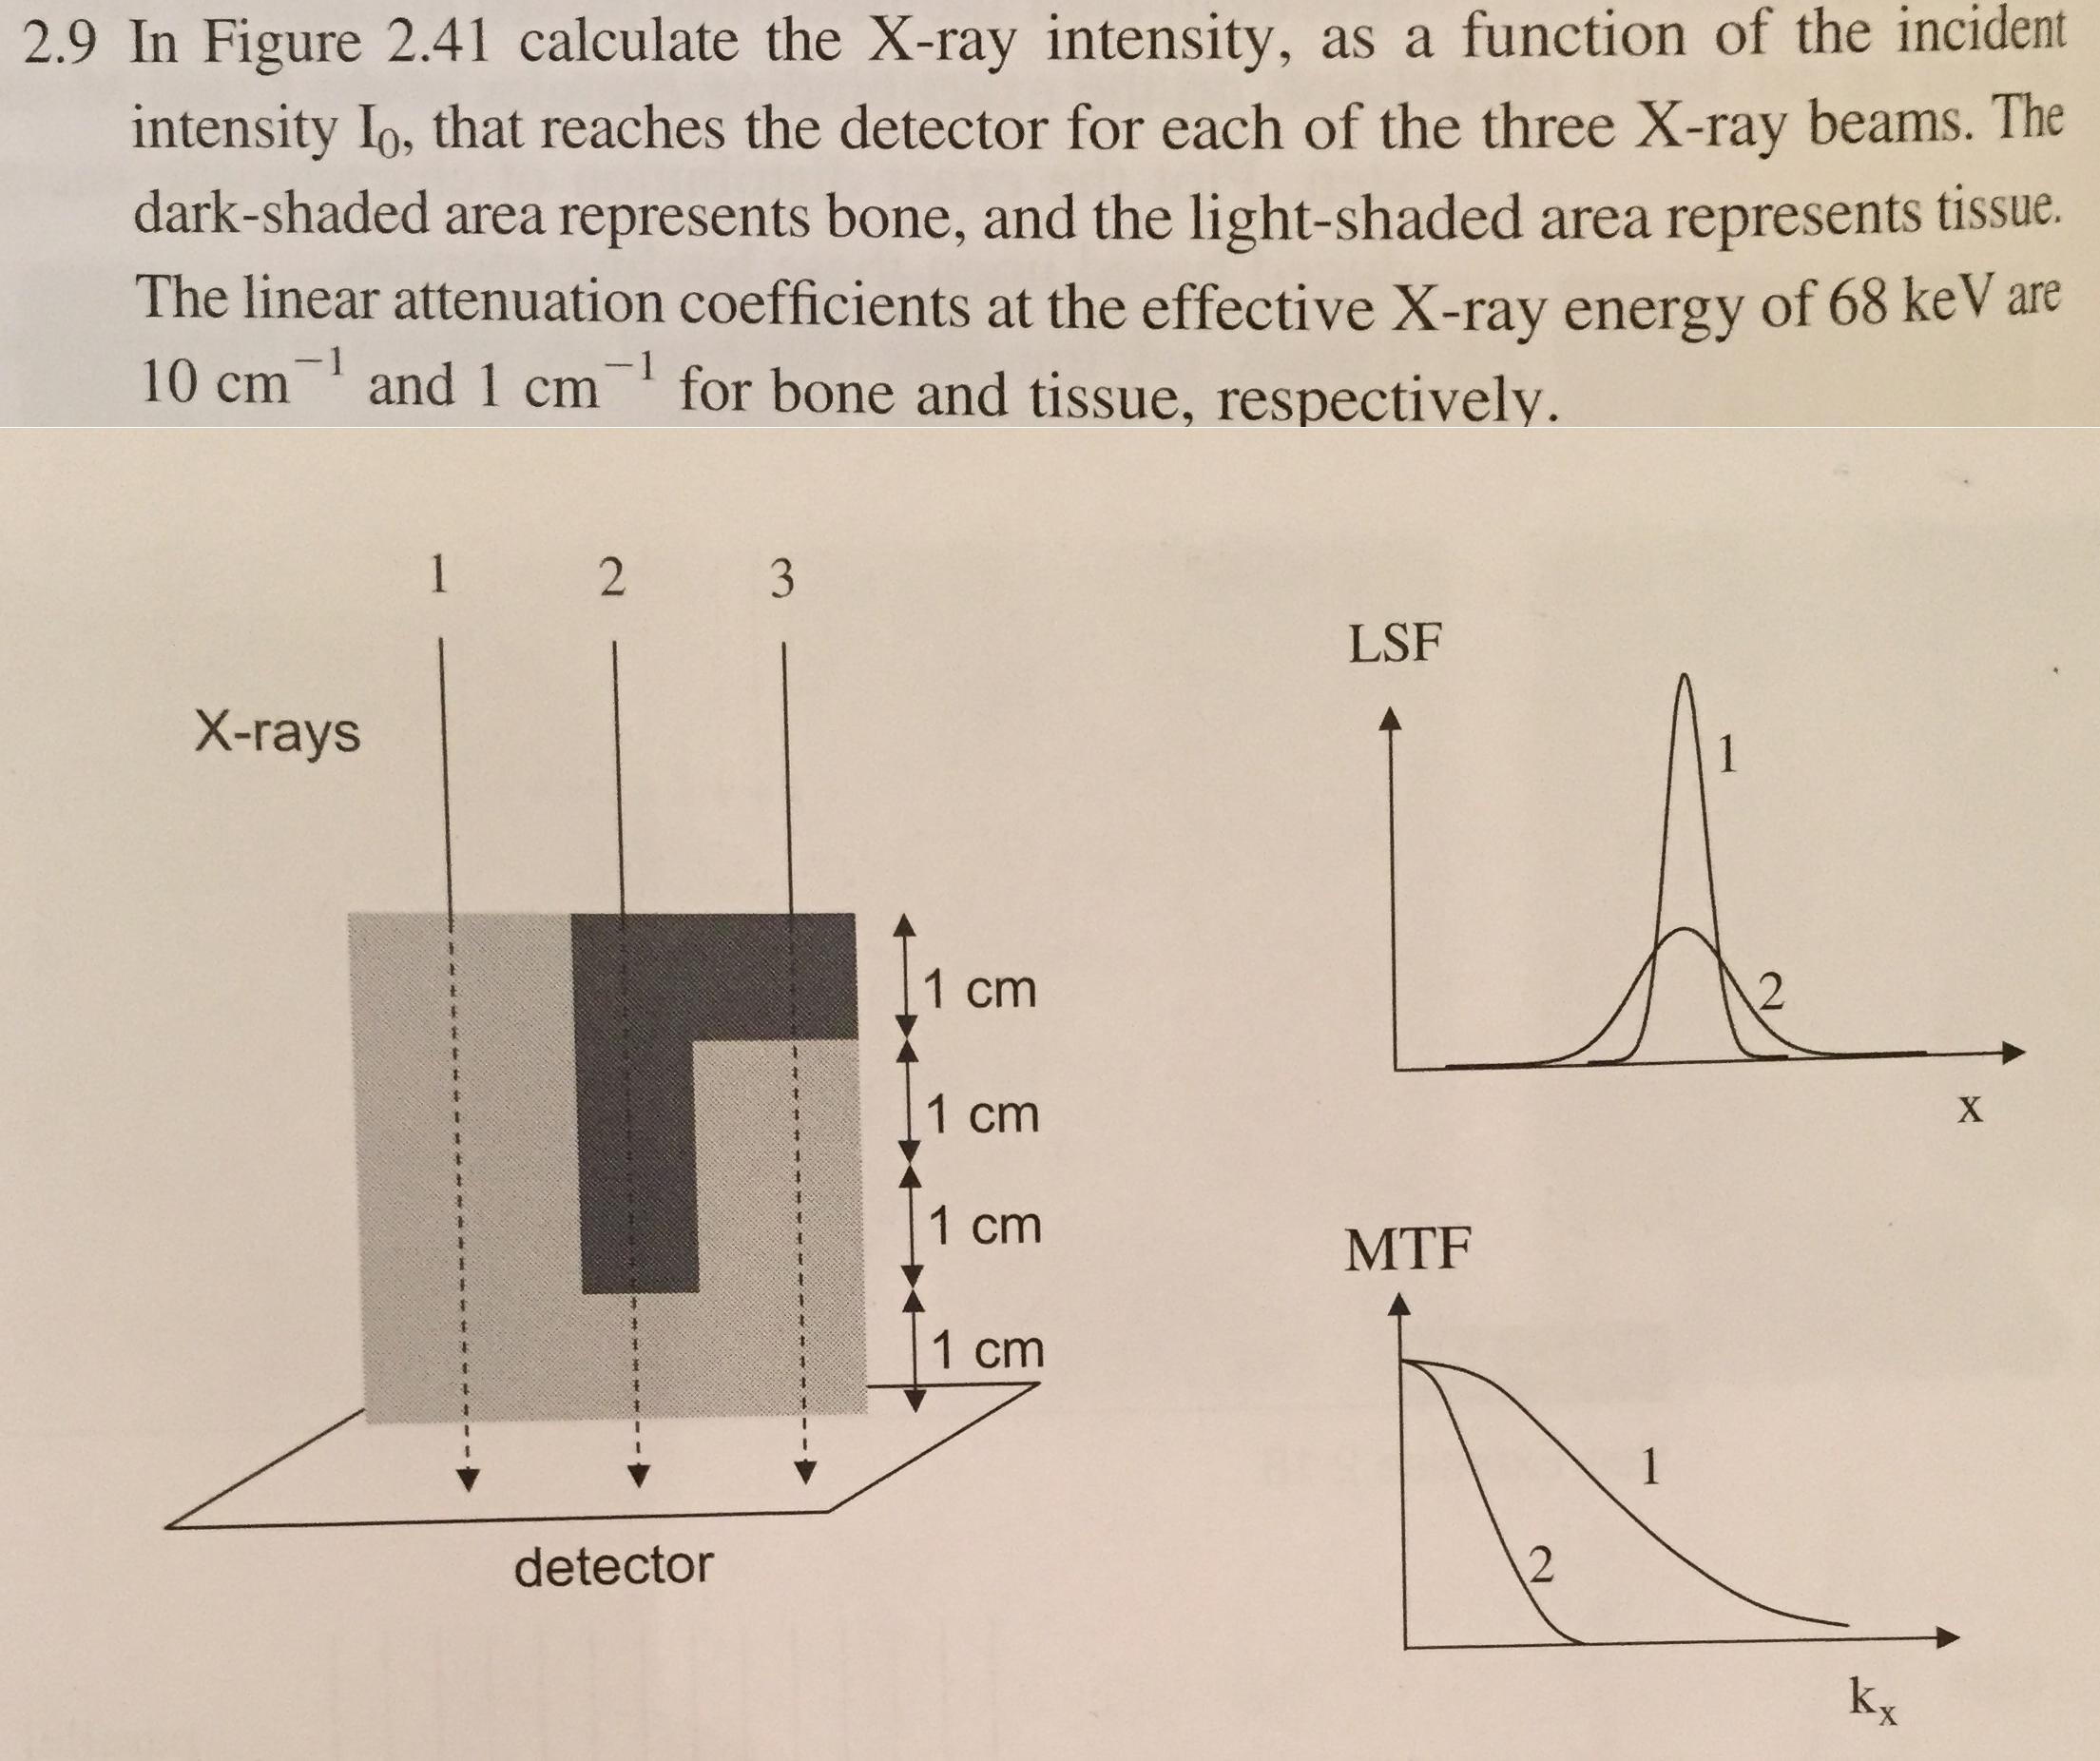 calculate the X-ray intensity, as a function of th